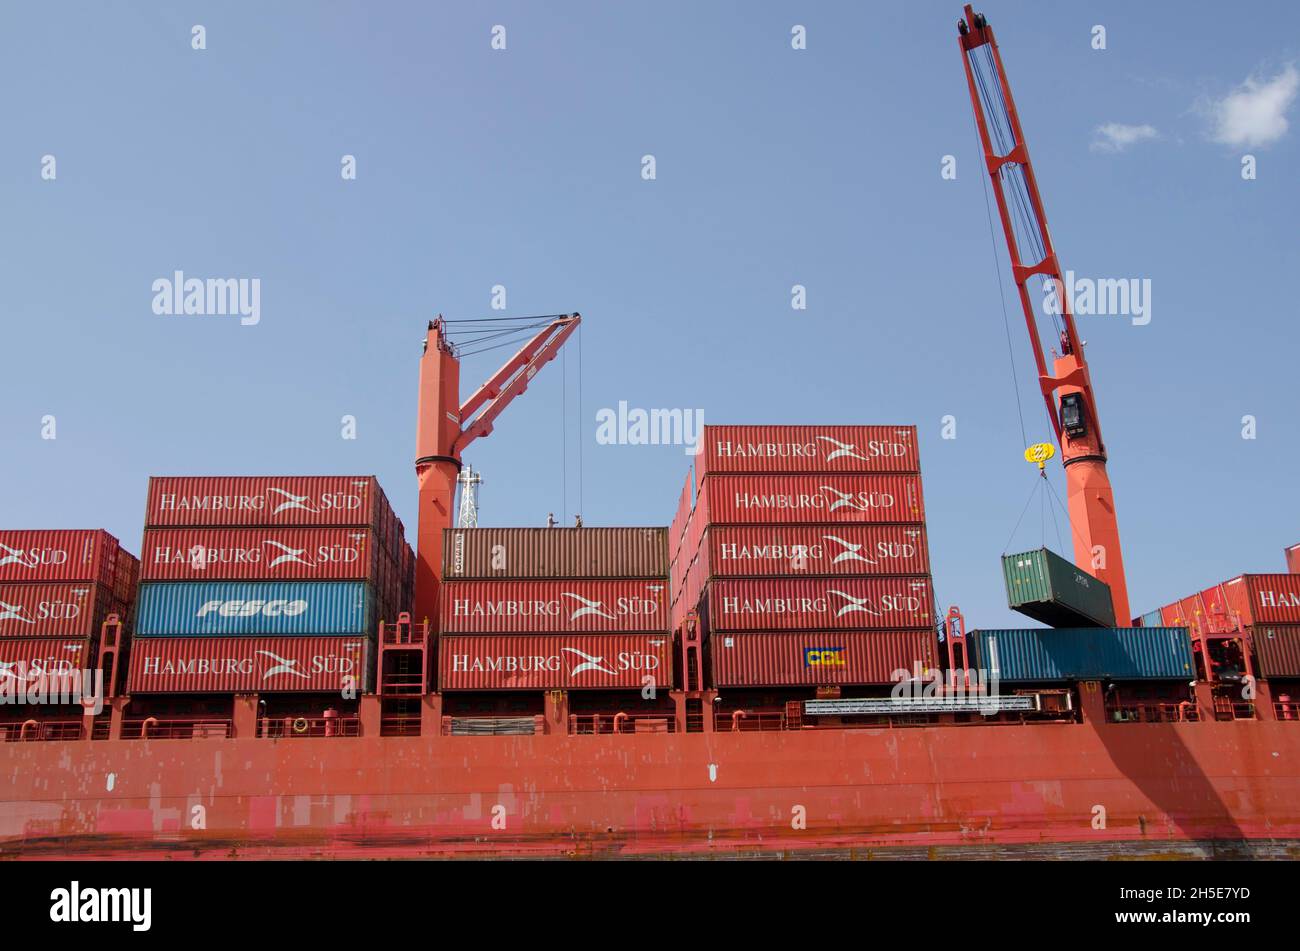 Cargo Container ship moored at a dock in the port waiting to be downloaded. Stock Photo